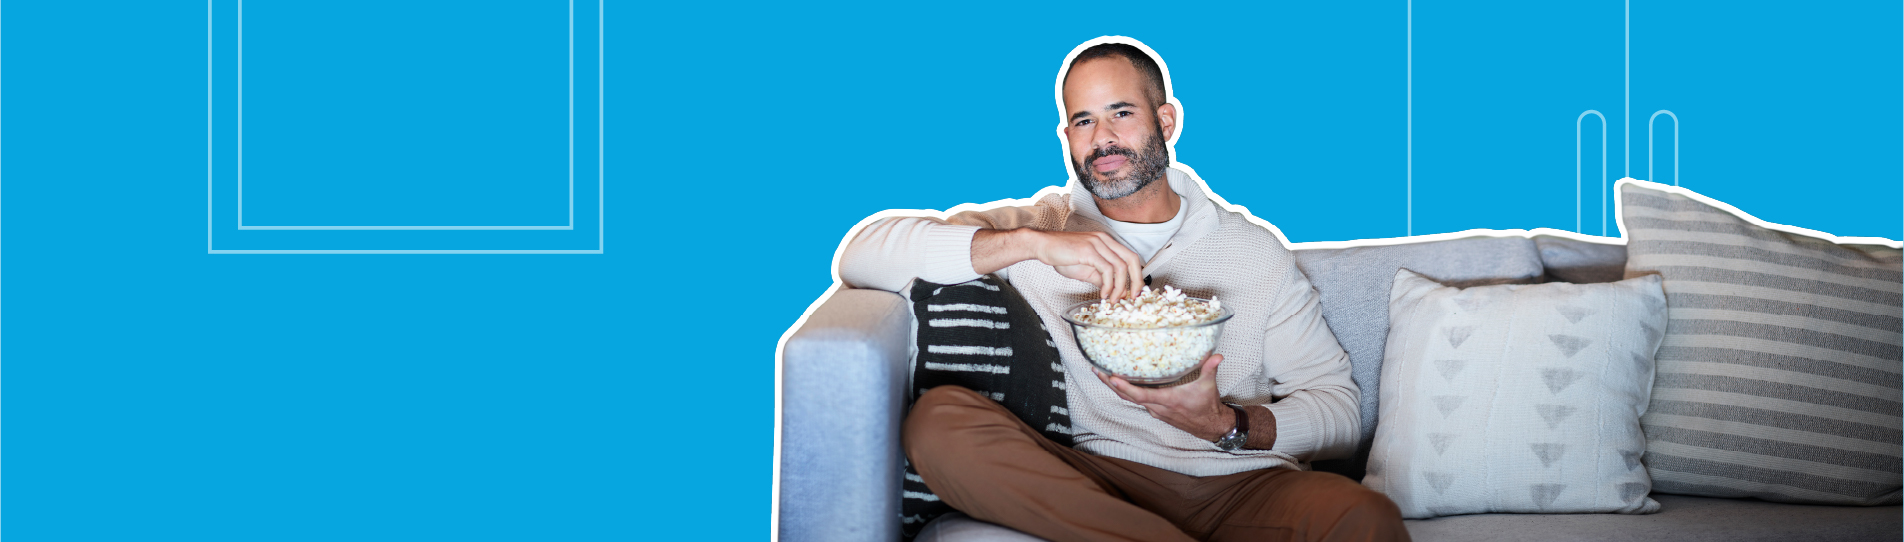 man sitting on couch holding a bowl of popcorn and watching TV